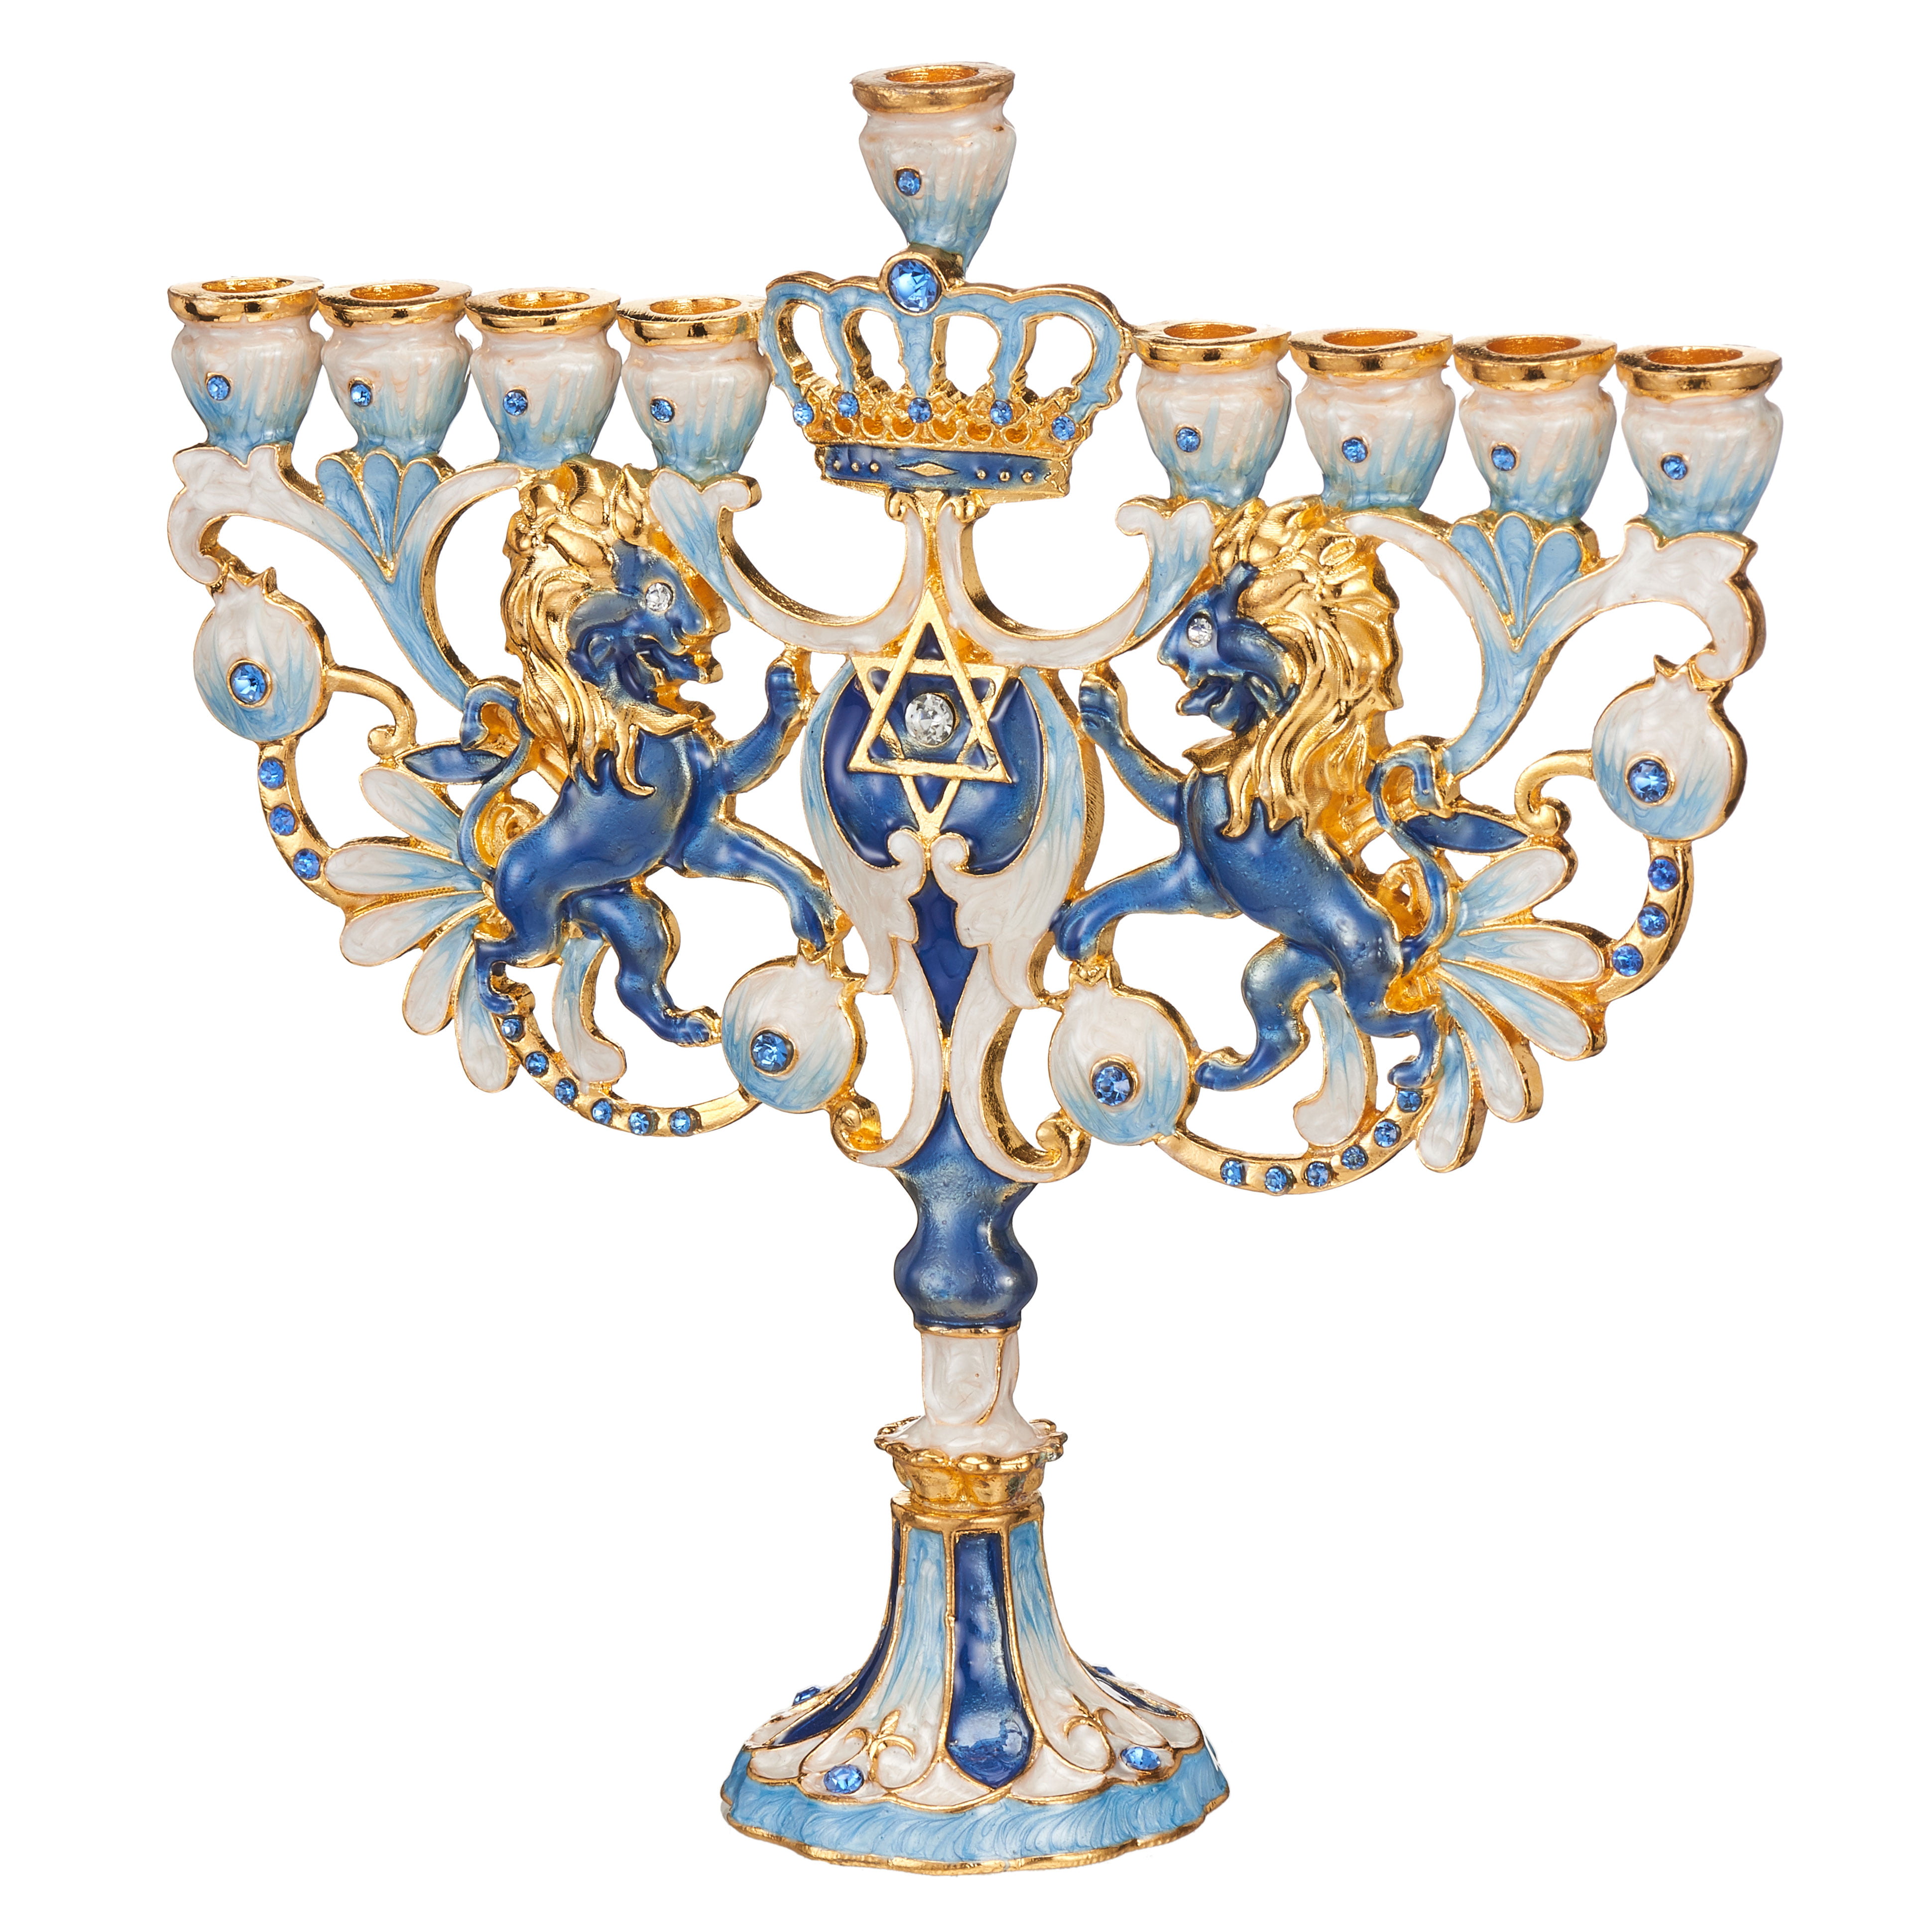 Embellished with Gold Accents and Crystals Jewish Candle Holder Hanukkah Gift for Housewarming Showpiece for Living Room Matashi Hand Painted Blue and Ivory Regal Lion Menorah Candelabra 